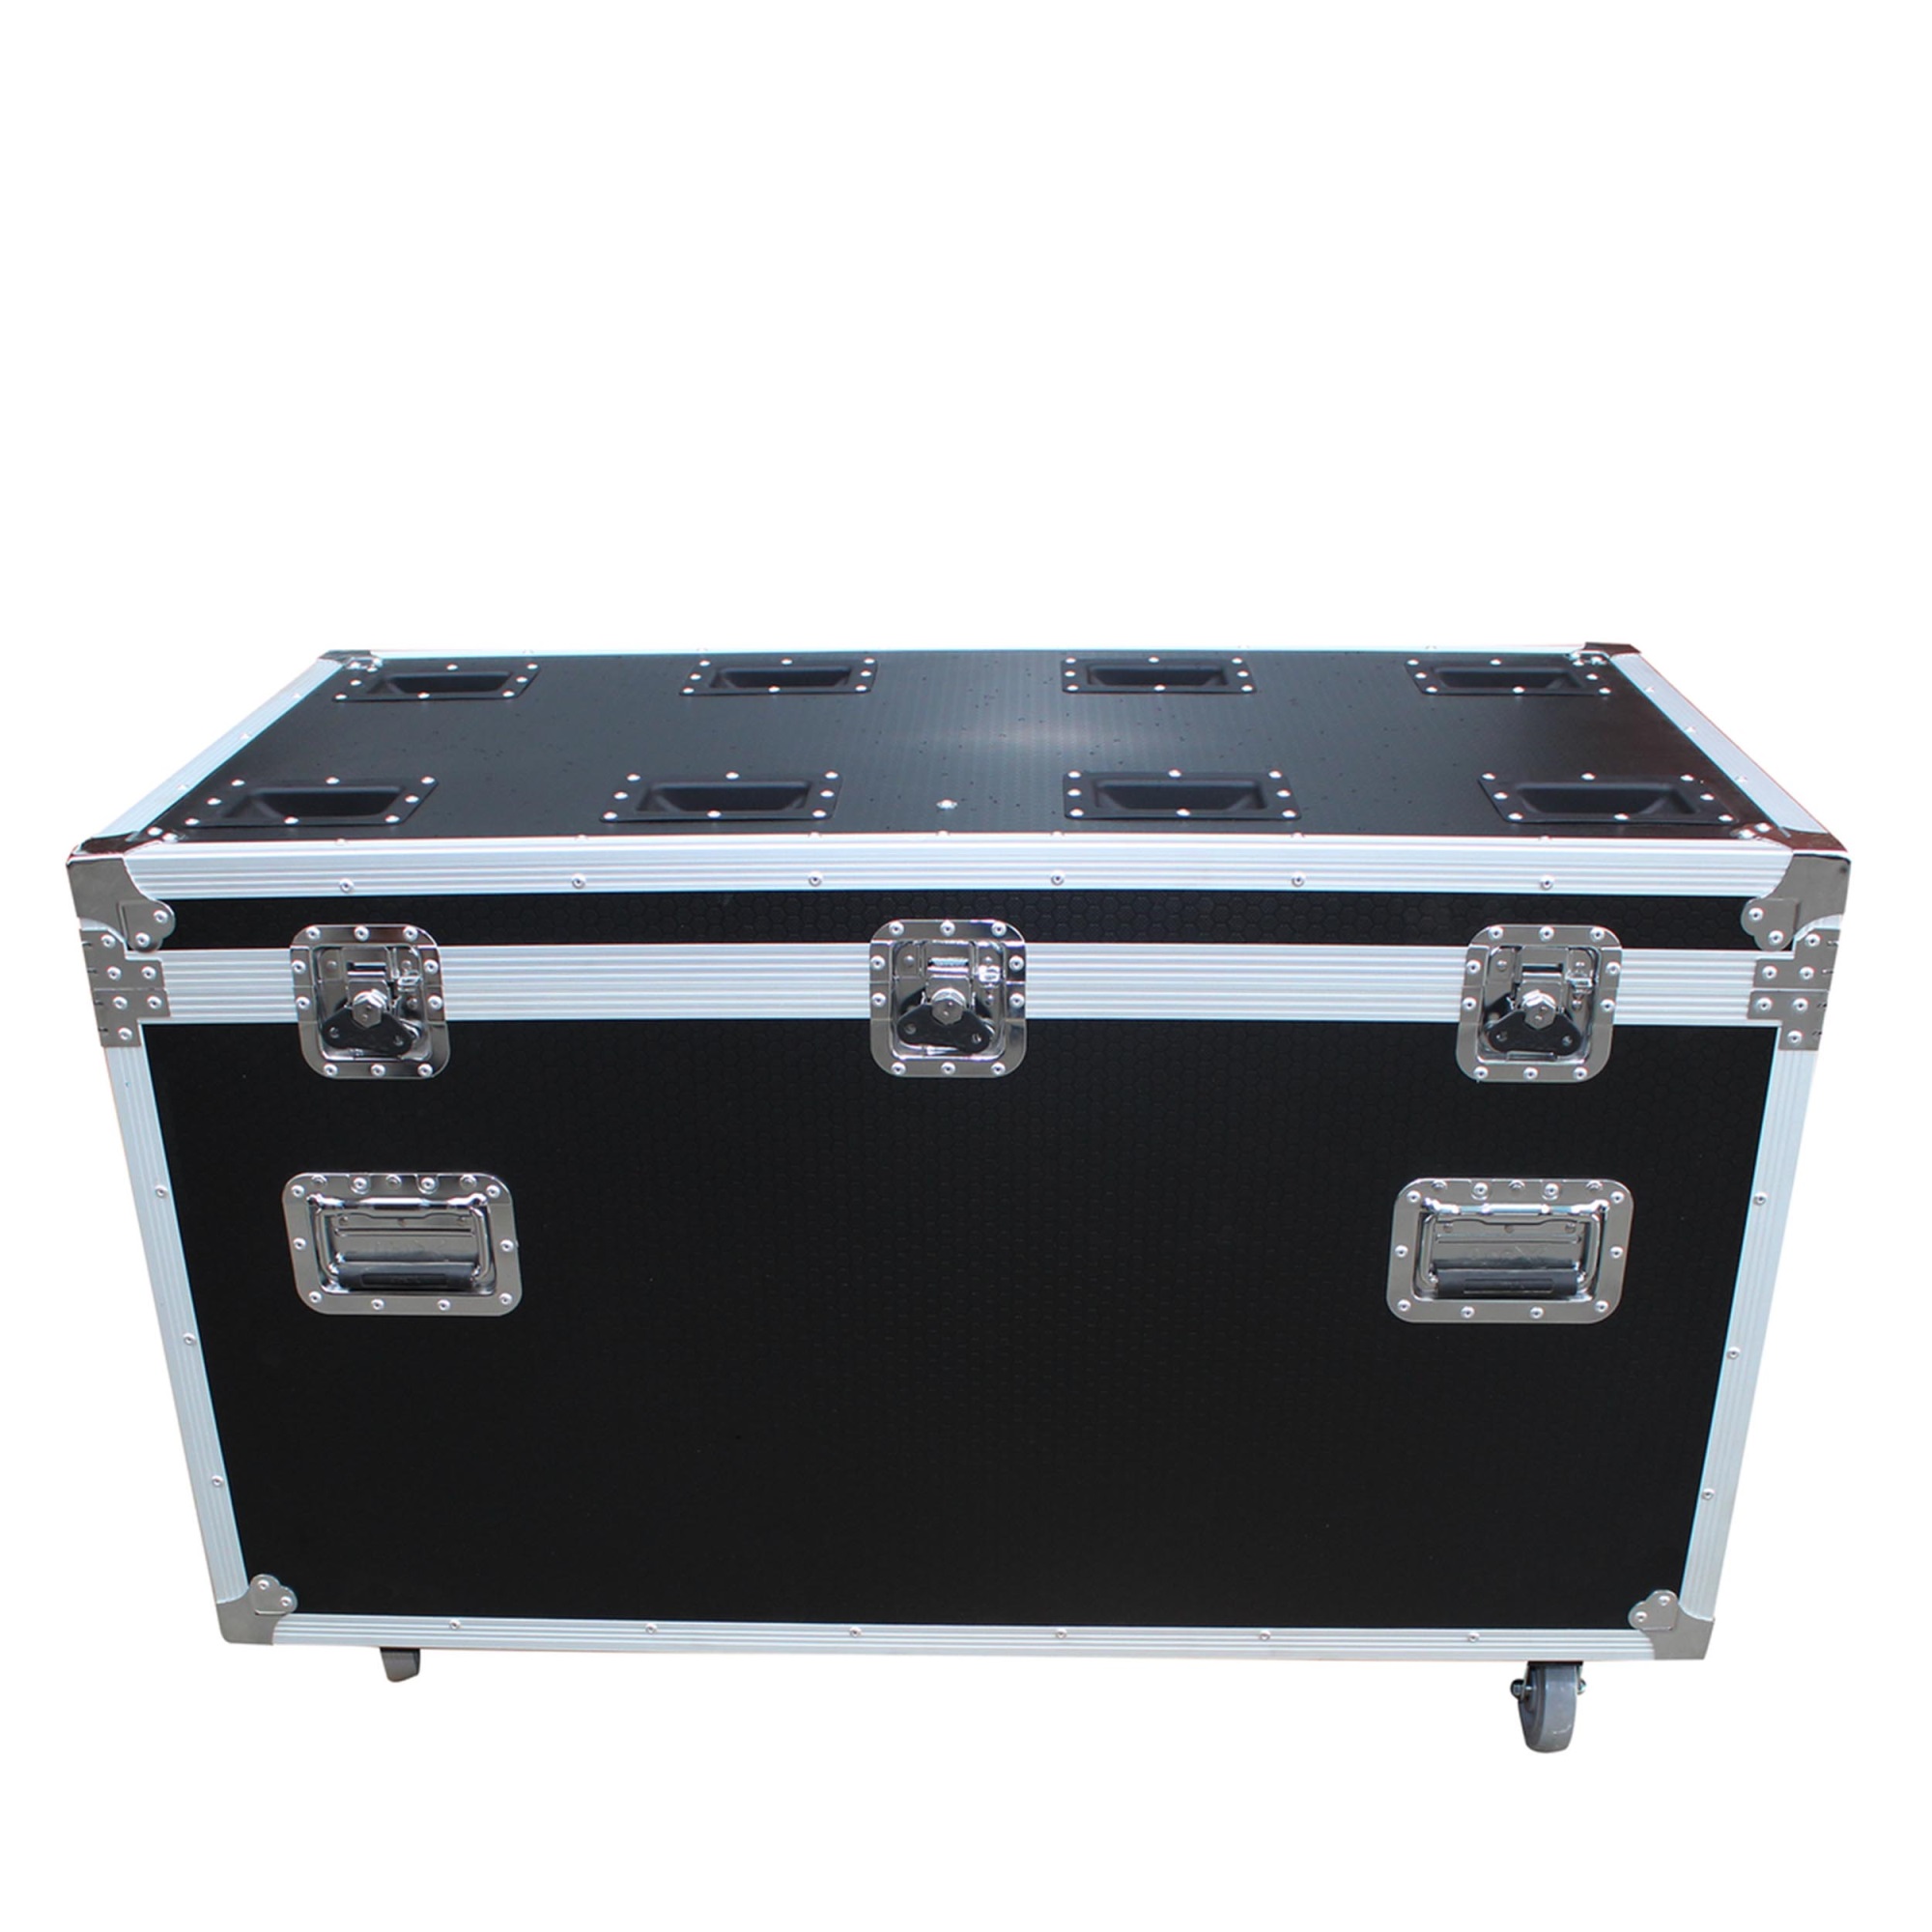 ProX XS-UTL3PKG 3 Case Package - Utility Storage ATA Style Road Cases 1 Large and 2 Half Size